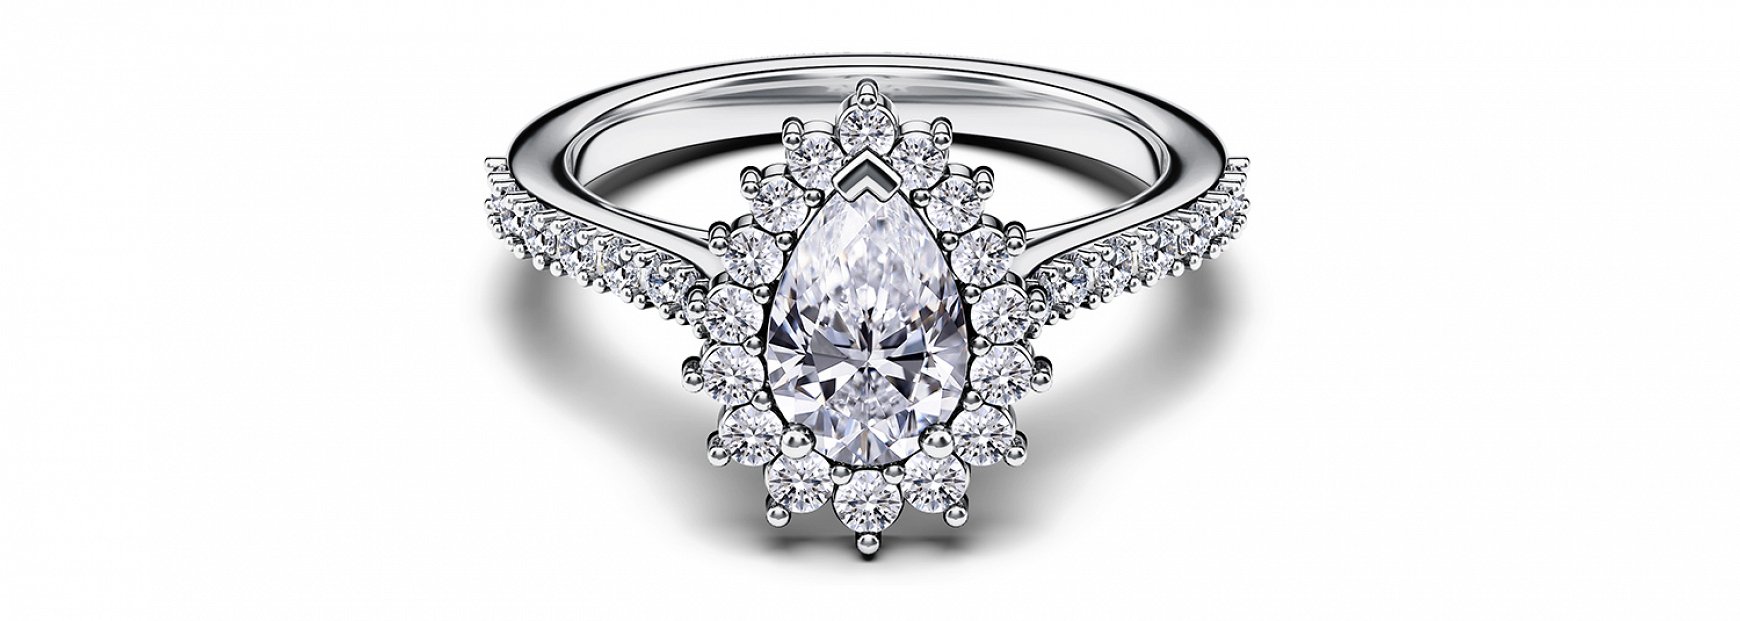 Halo Engagement Ring: the day-star brilliance on your finger